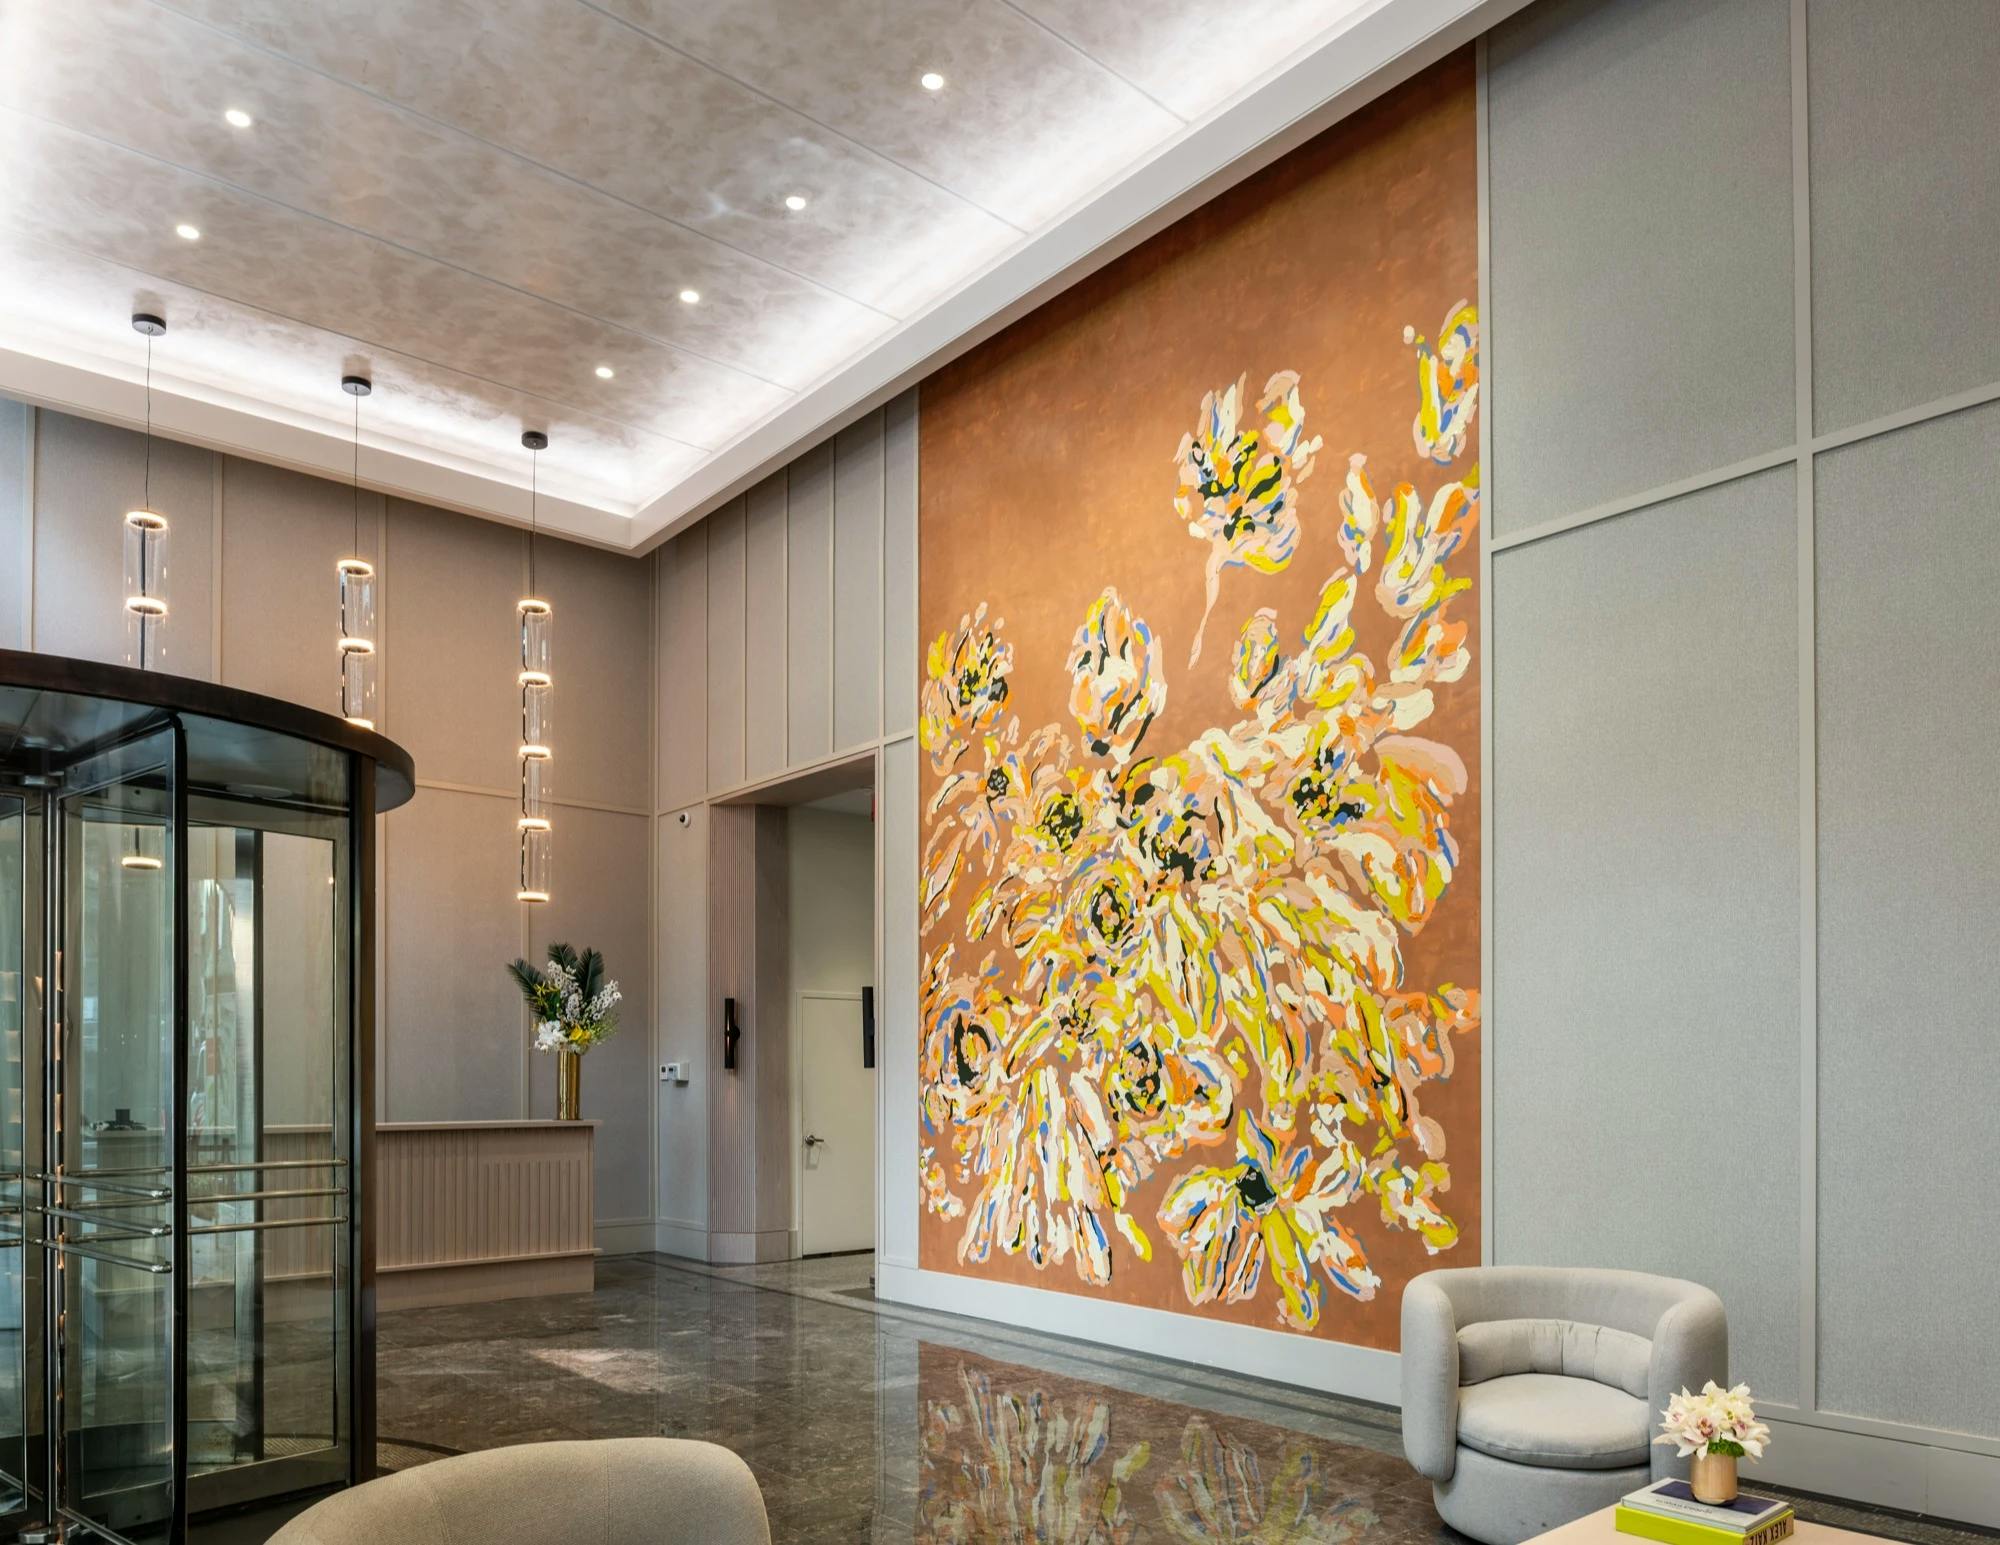 A large brown, yellow, and white floral mural by artist Erin Lynn Welsh flanked by two leather chairs in the lobby of Anagram NoMad.